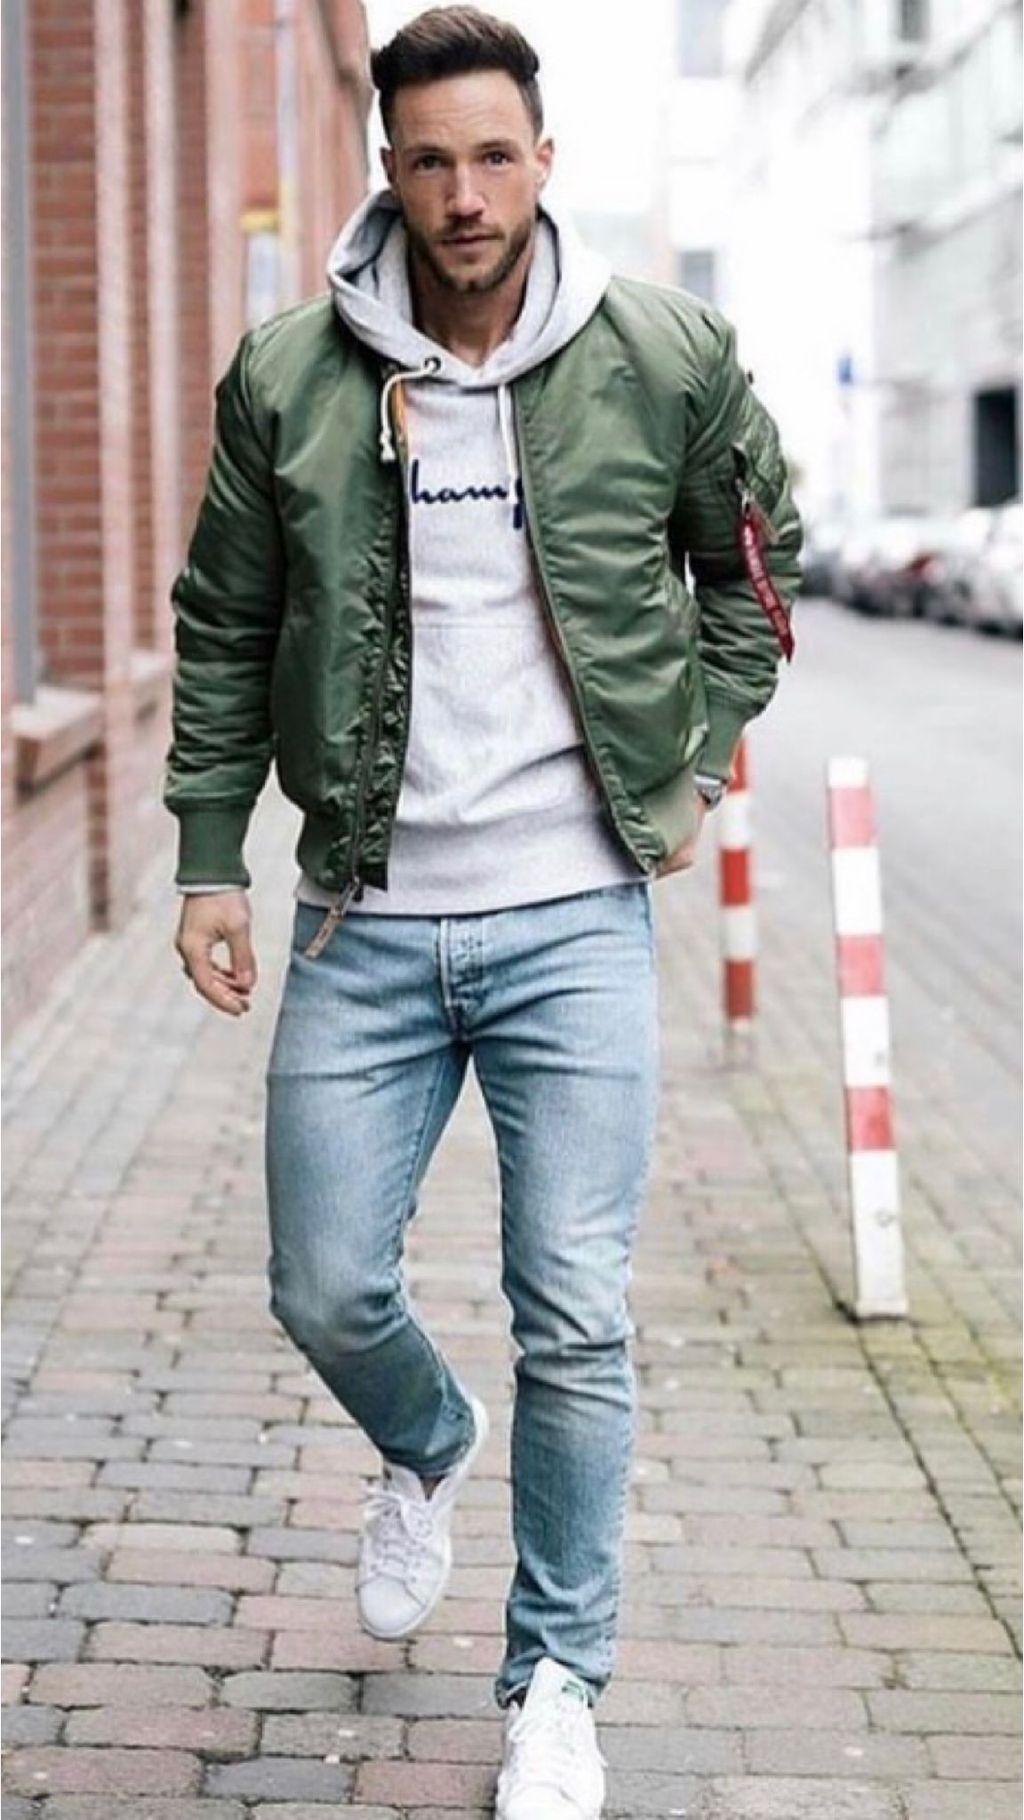 How To Style Casual Outfit For Guys Like A Pro! - How To Style Casual Outfit For Guys Like A Pro! -   17 fitness Men outfits ideas